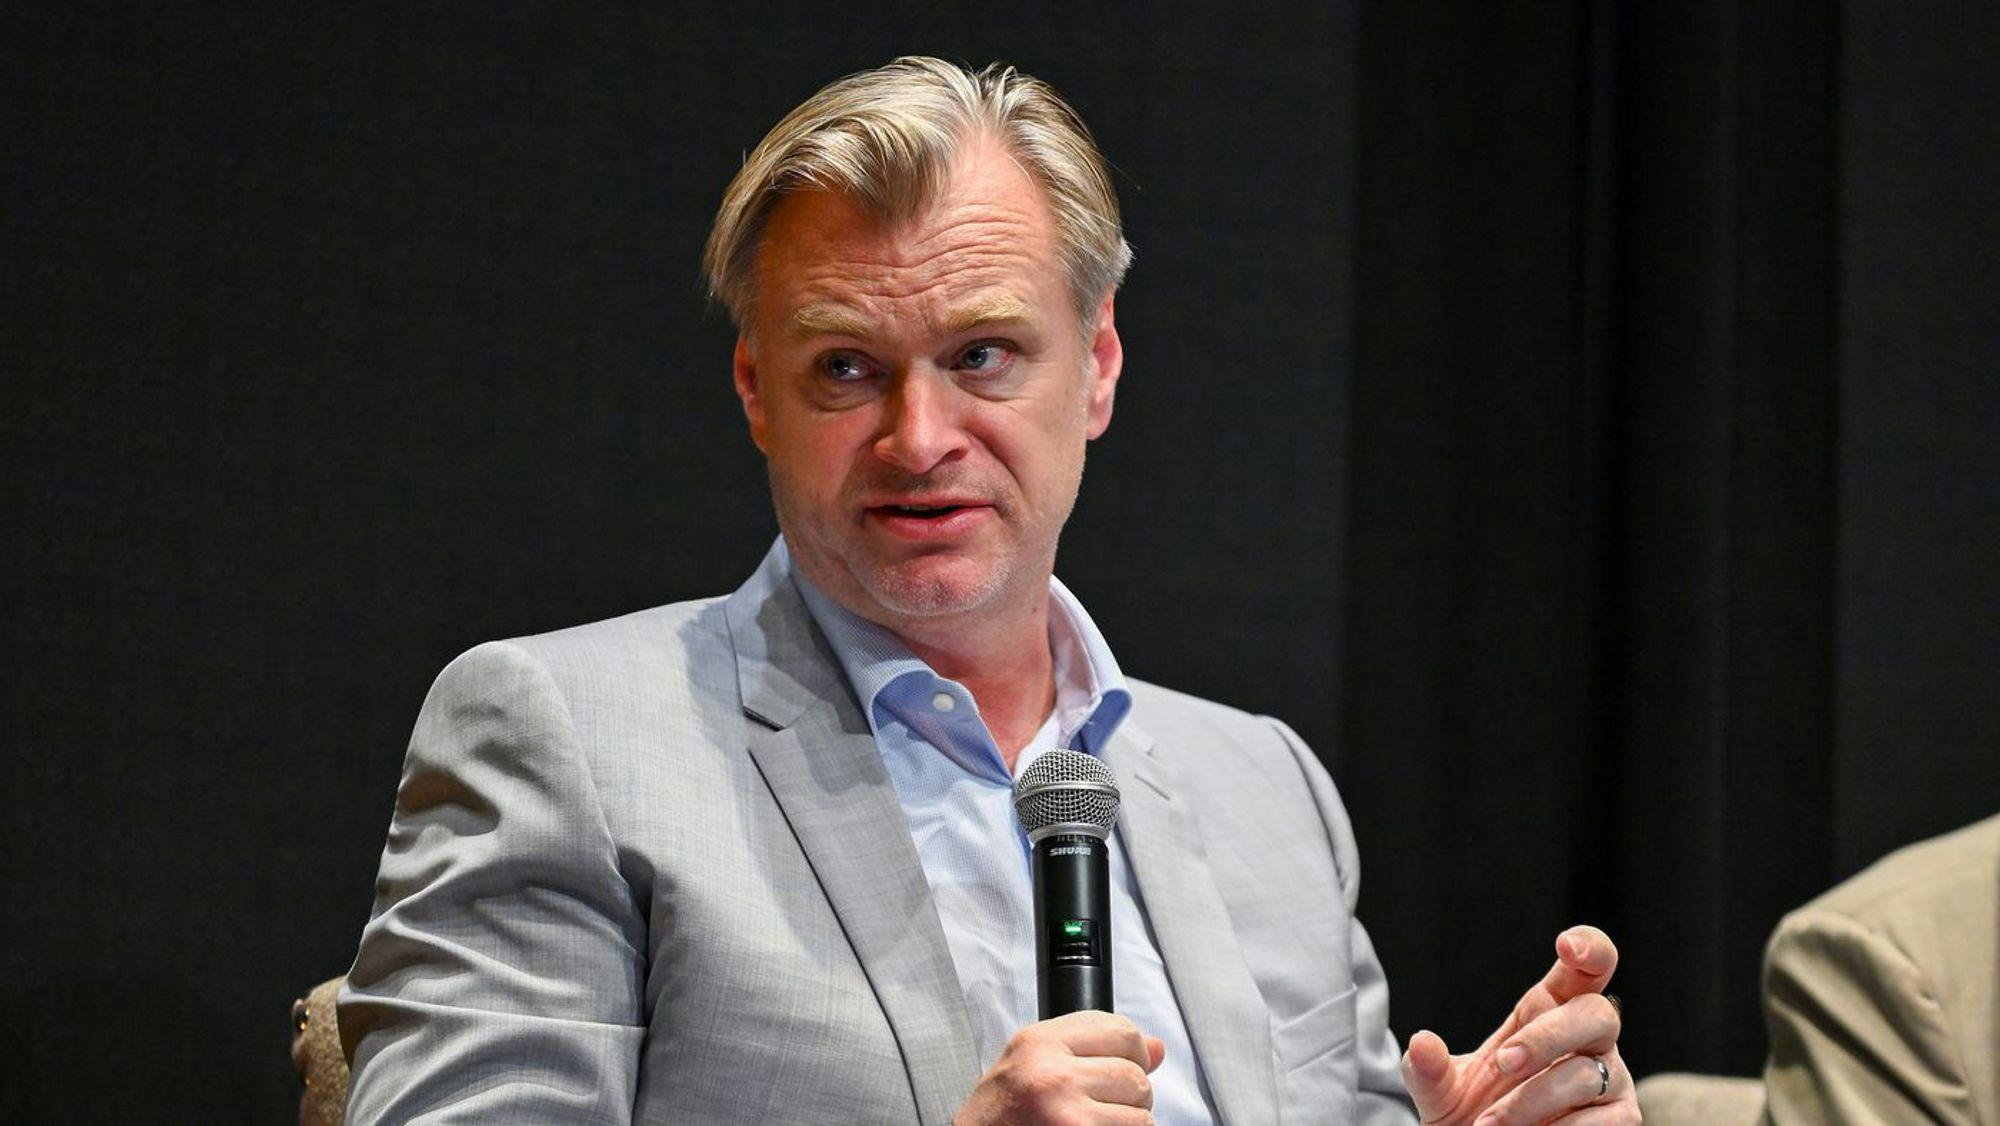 Christopher Nolan wants Oppenheimer to be a cautionary tale for Silicon Valley